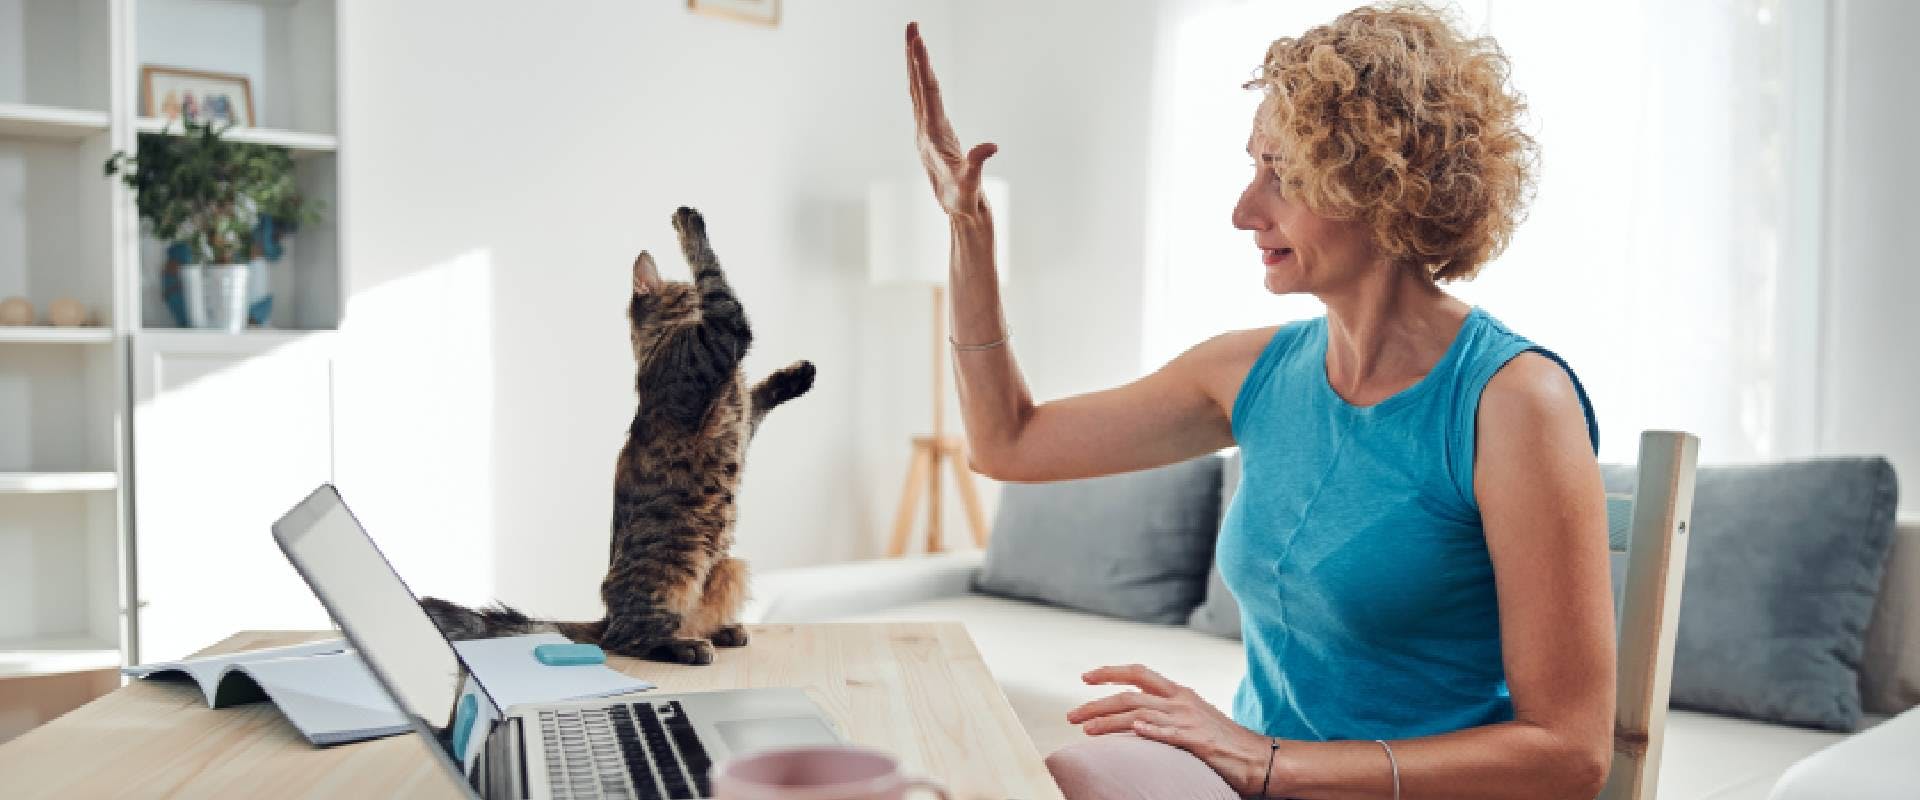 Person high fiving a cat